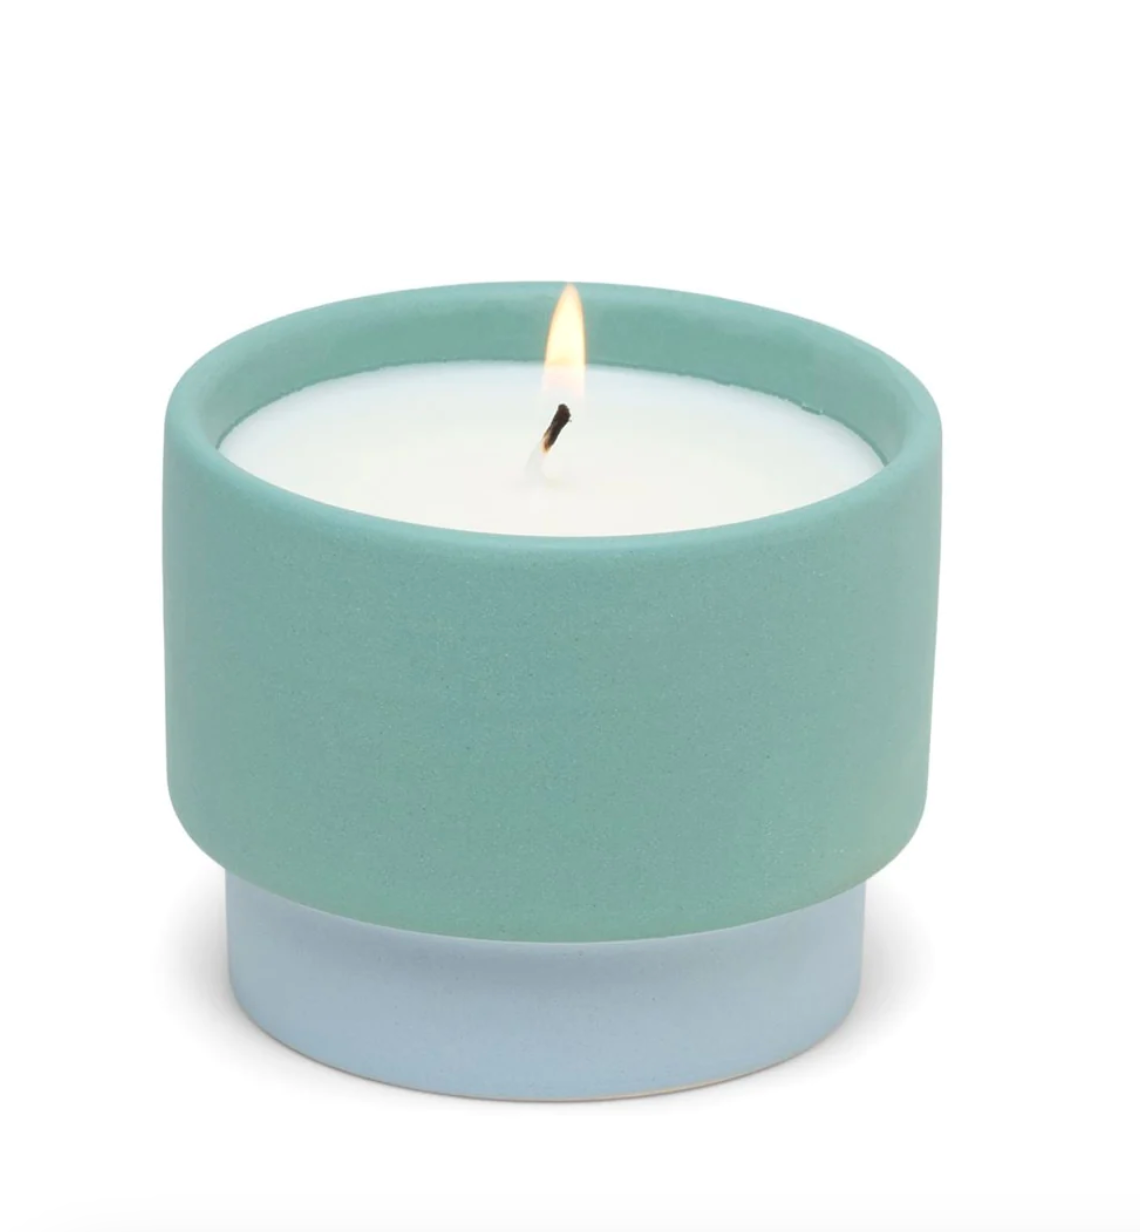 Paddy Wax Colour Block Ceramic Candle